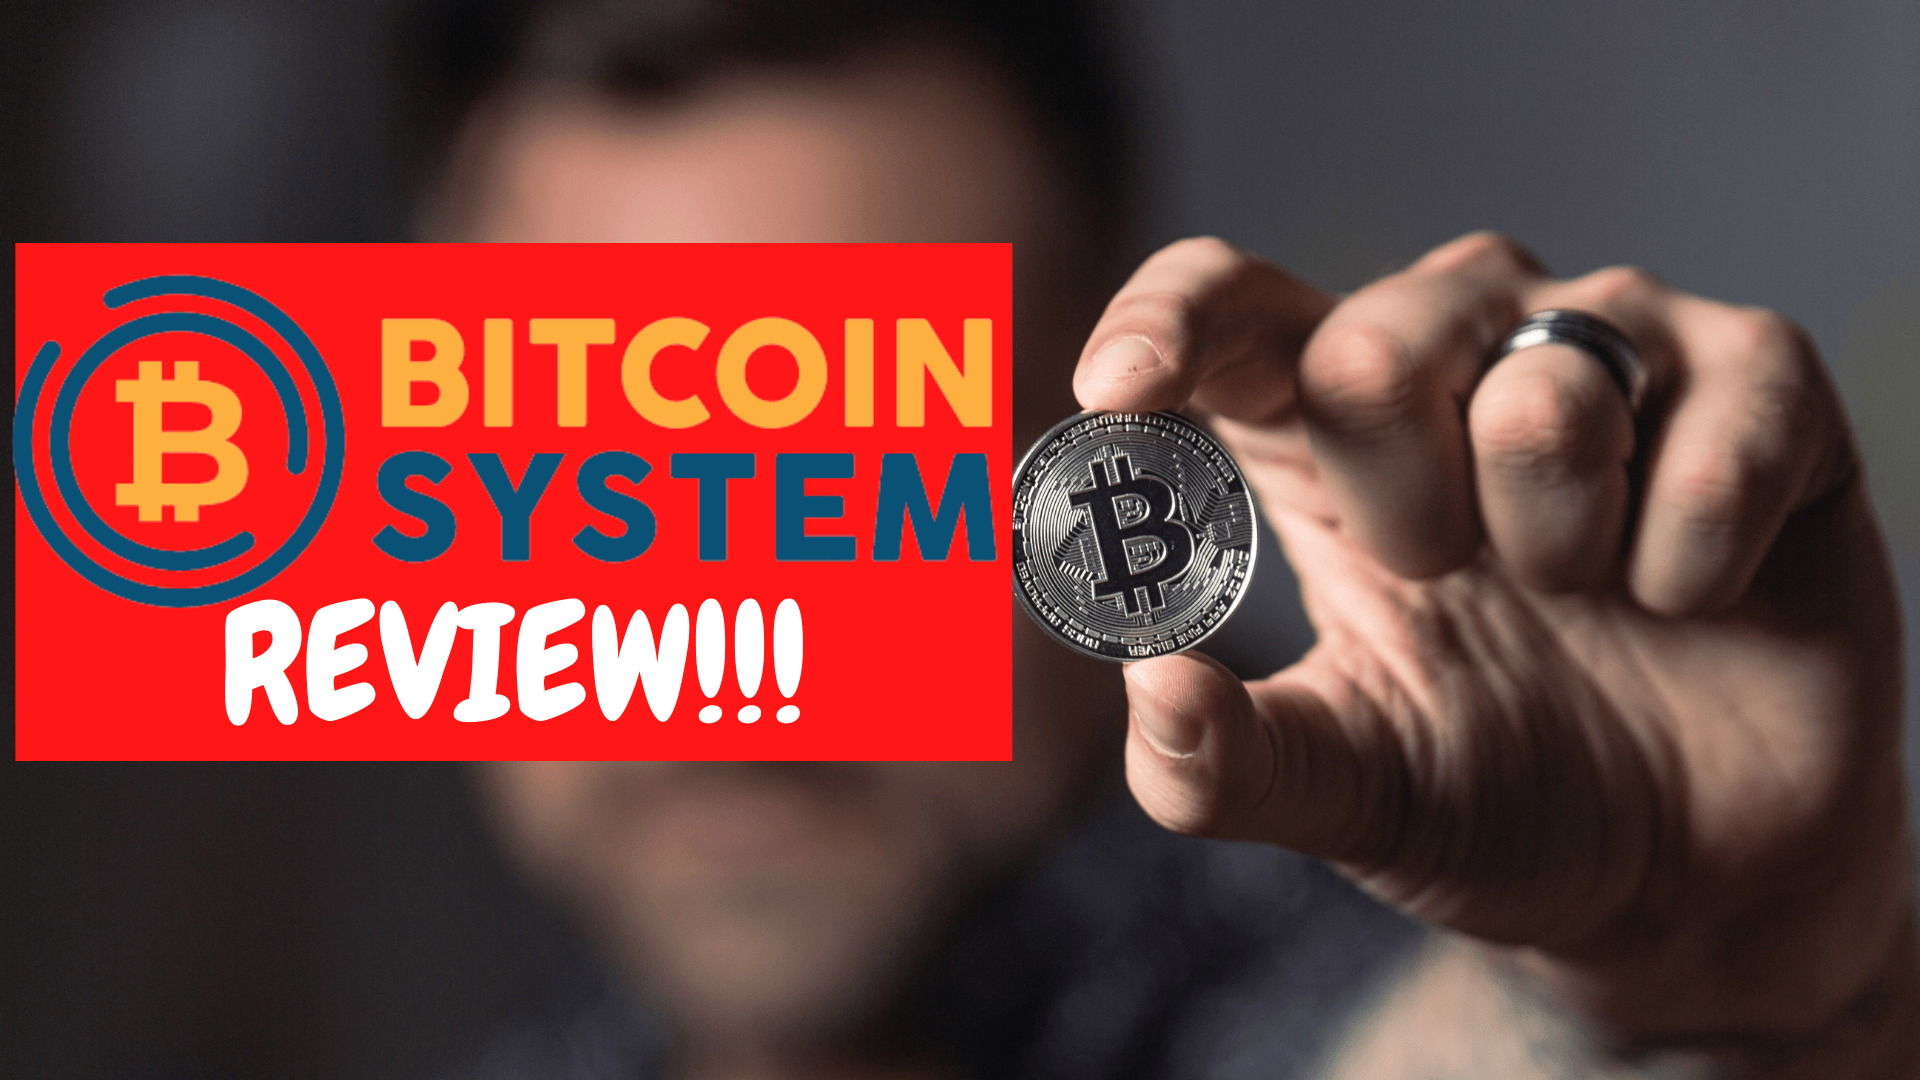 Bitcoin System FRONTPAGE